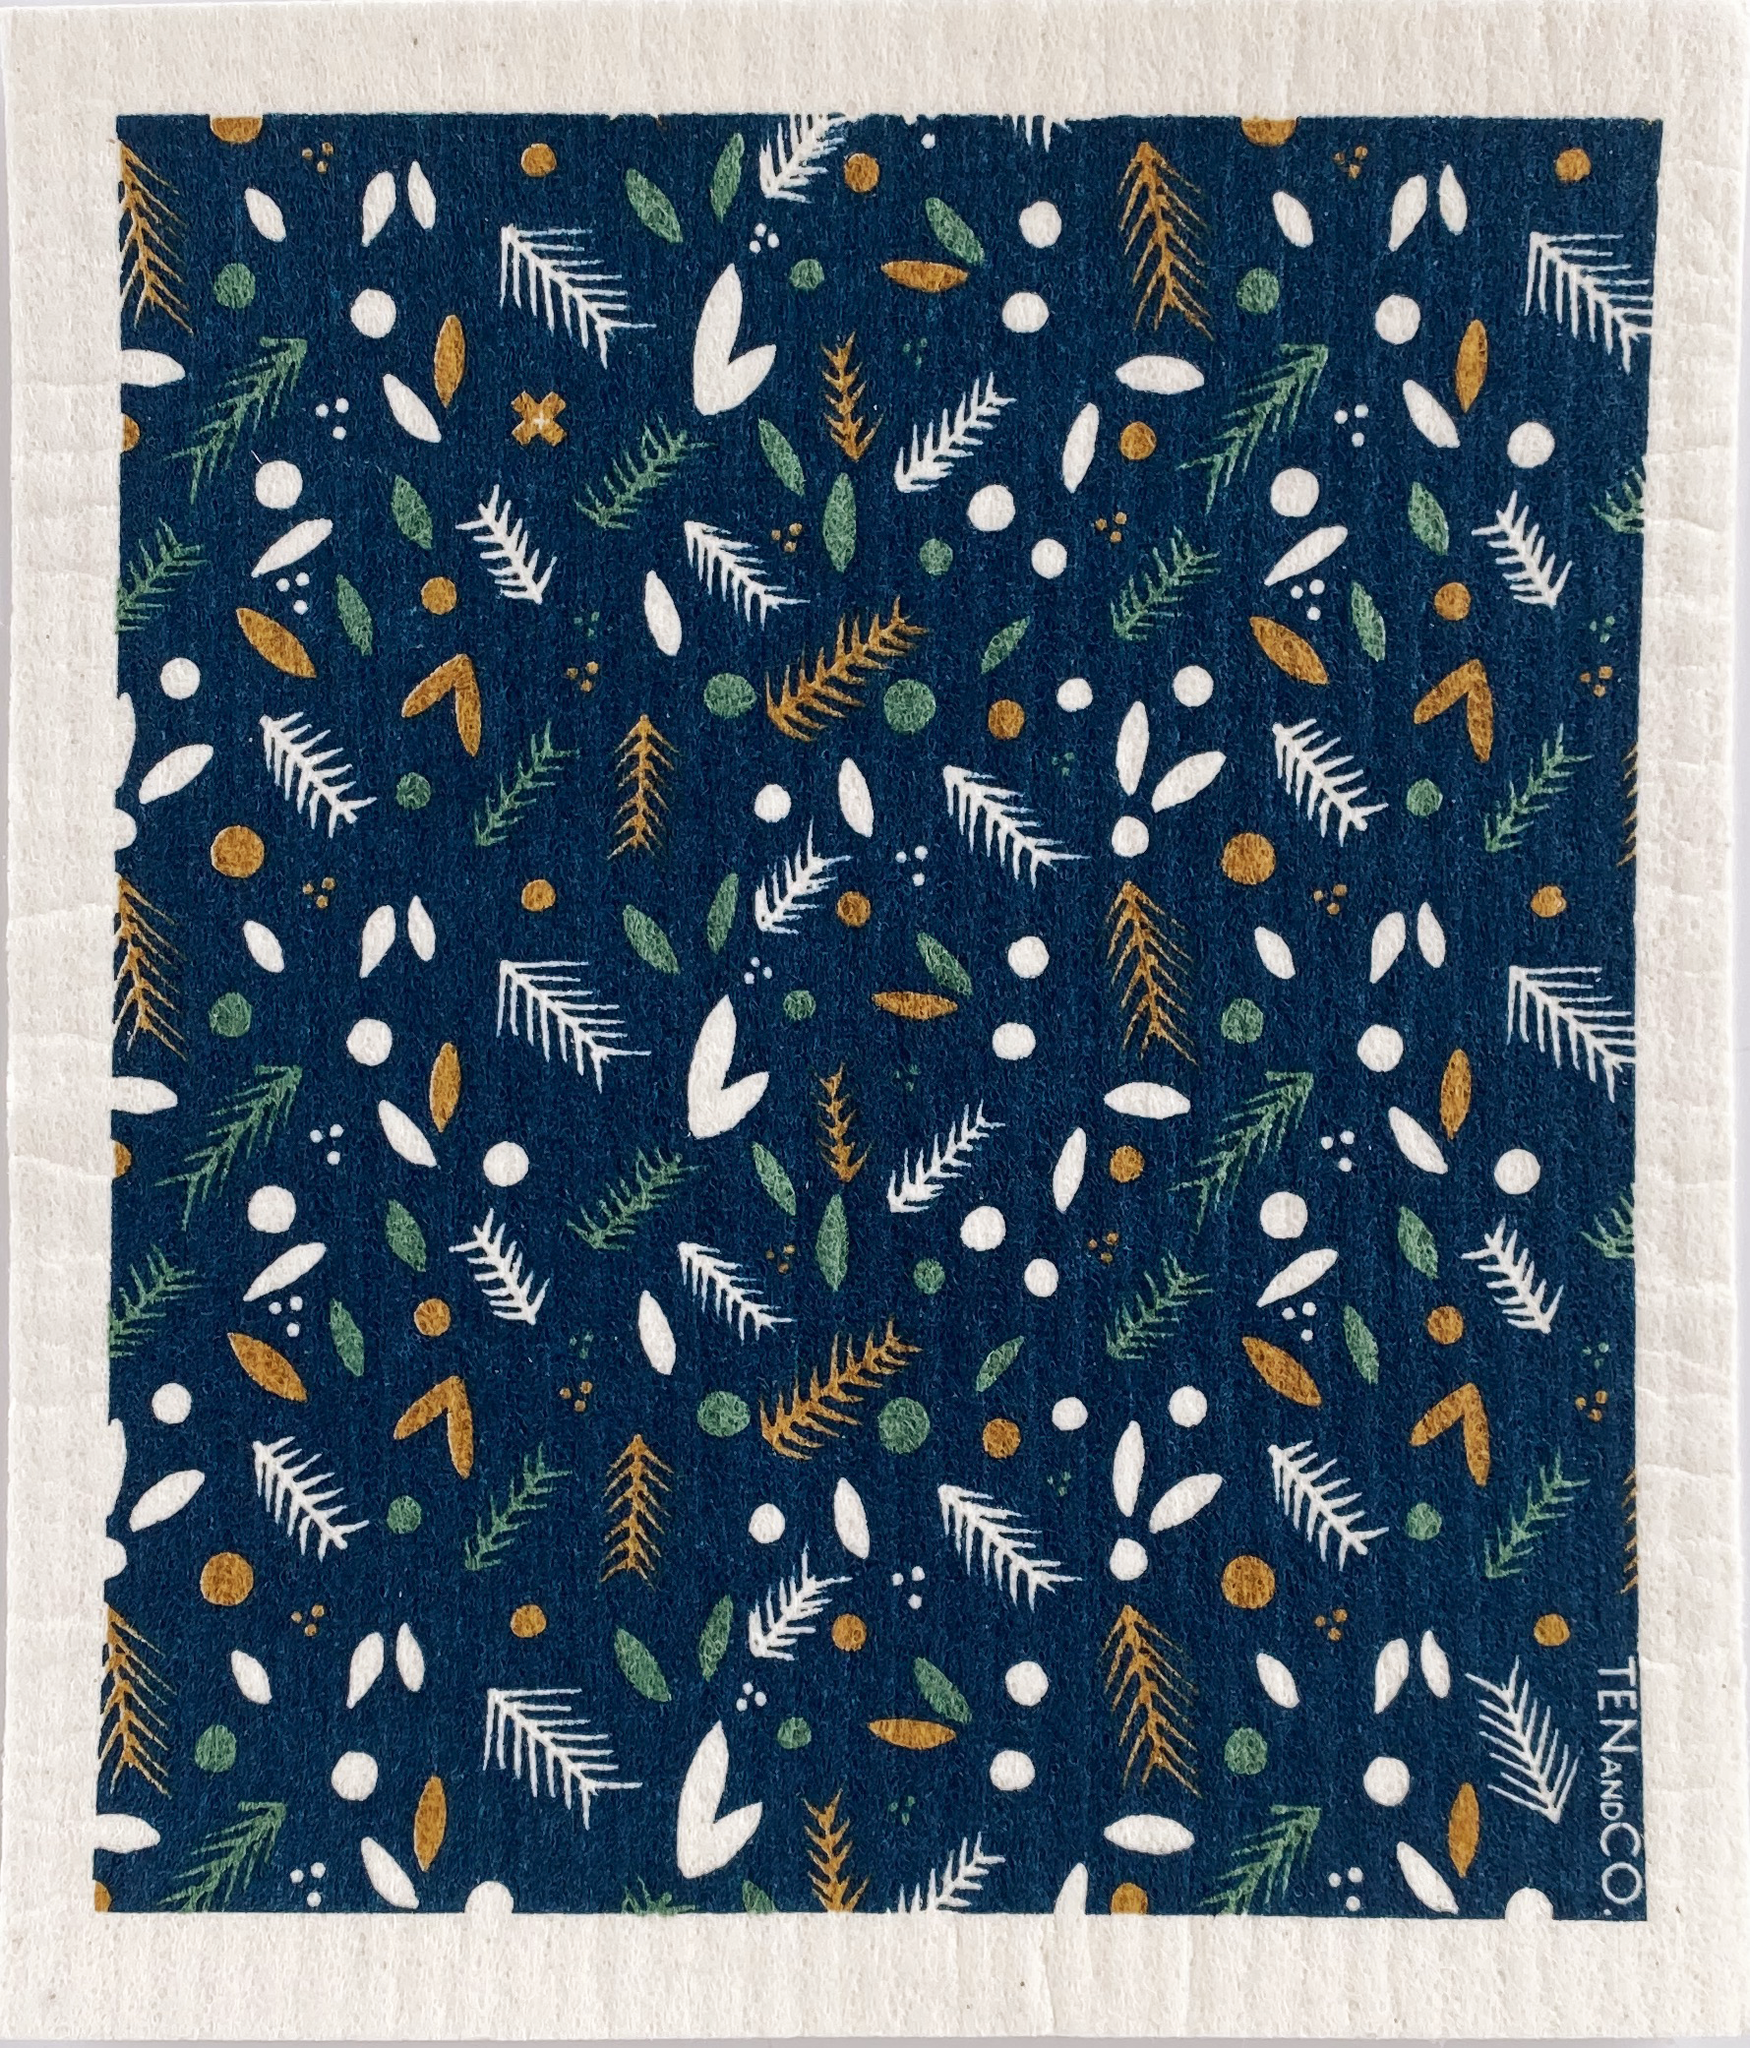 blue dishcloth with green, yellow, and white pine needles and berries in a pattern covering the towel.